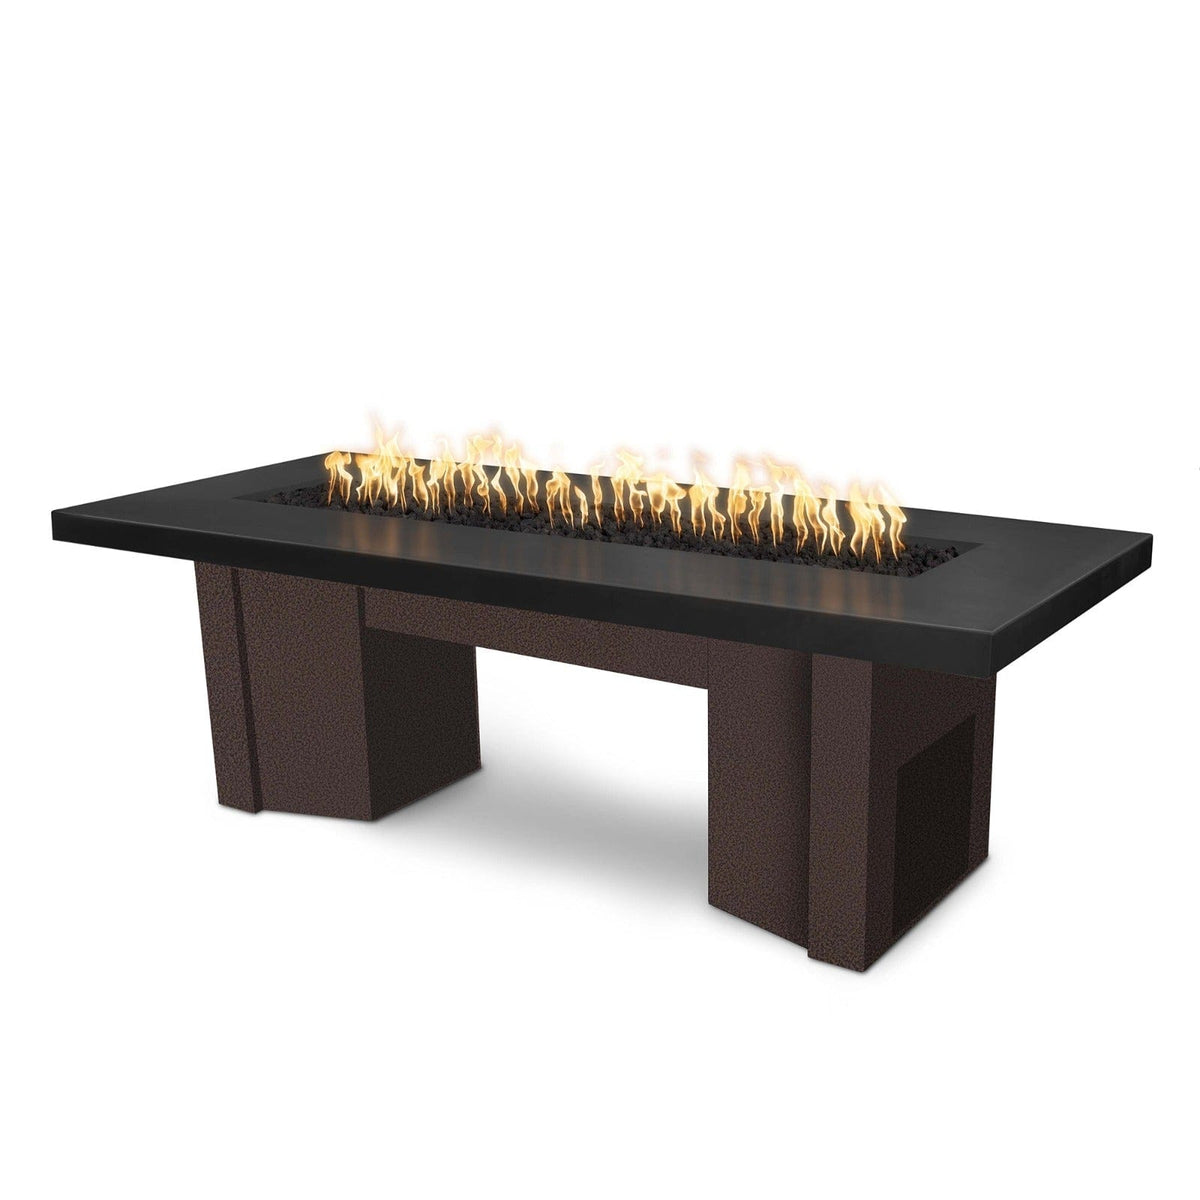 The Outdoor Plus Fire Features Black (-BLK) / Copper Vein Powder Coated Steel (-CPV) The Outdoor Plus 78&quot; Alameda Fire Table Smooth Concrete in Liquid Propane - Flame Sense System with Push Button Spark Igniter / OPT-ALMGFRC78FSEN-LP